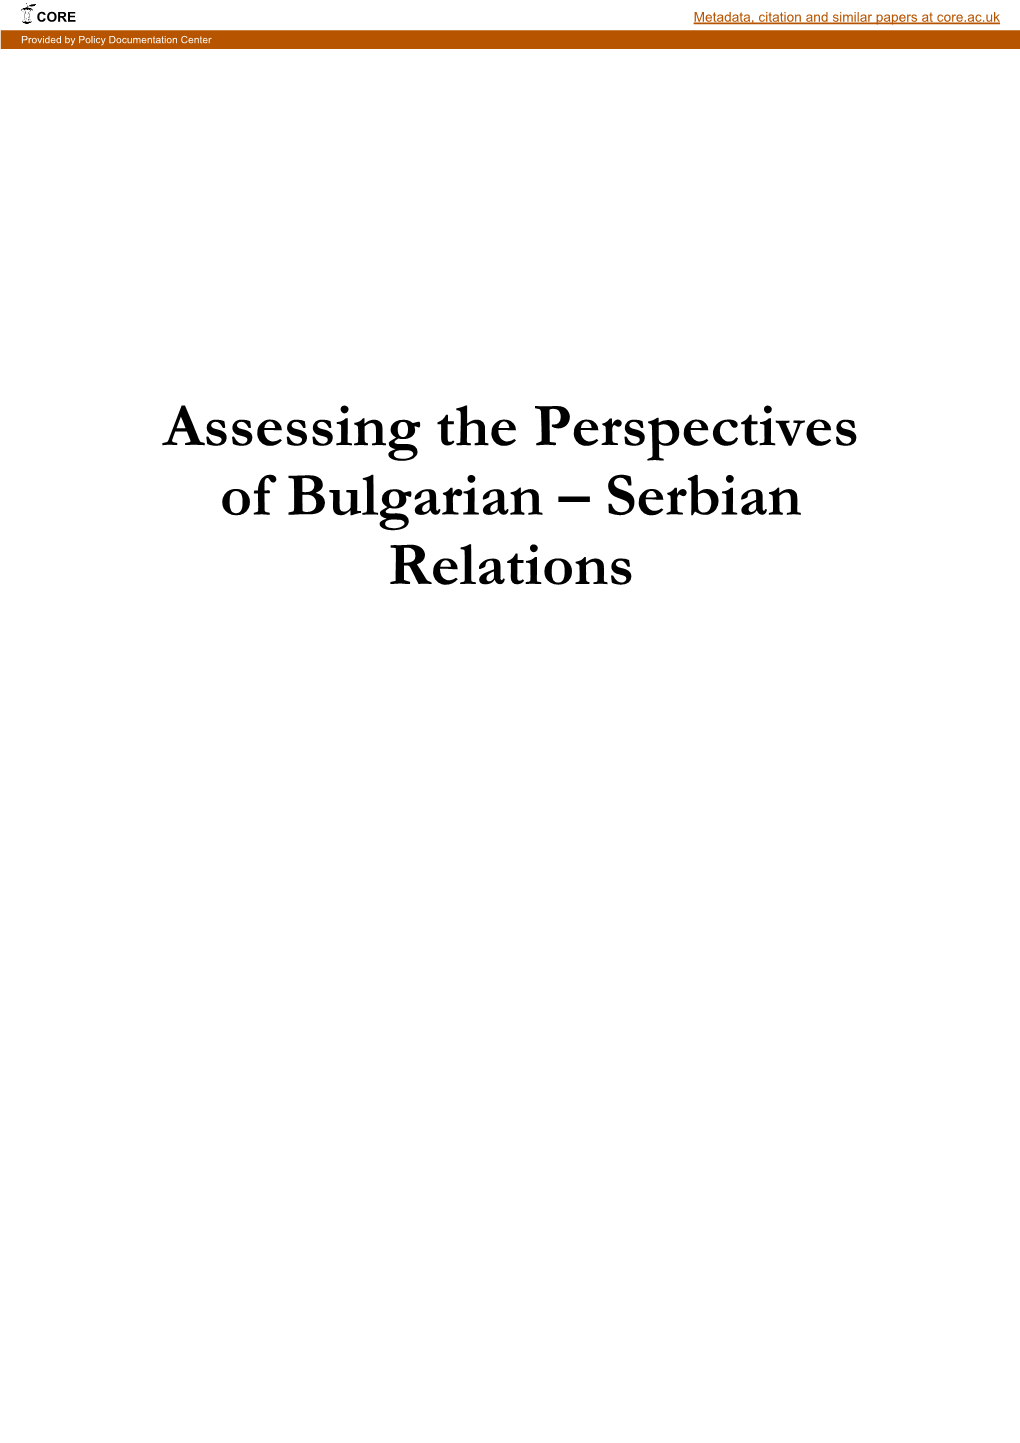 Assessing the Perspectives of Bulgarian – Serbian Relations